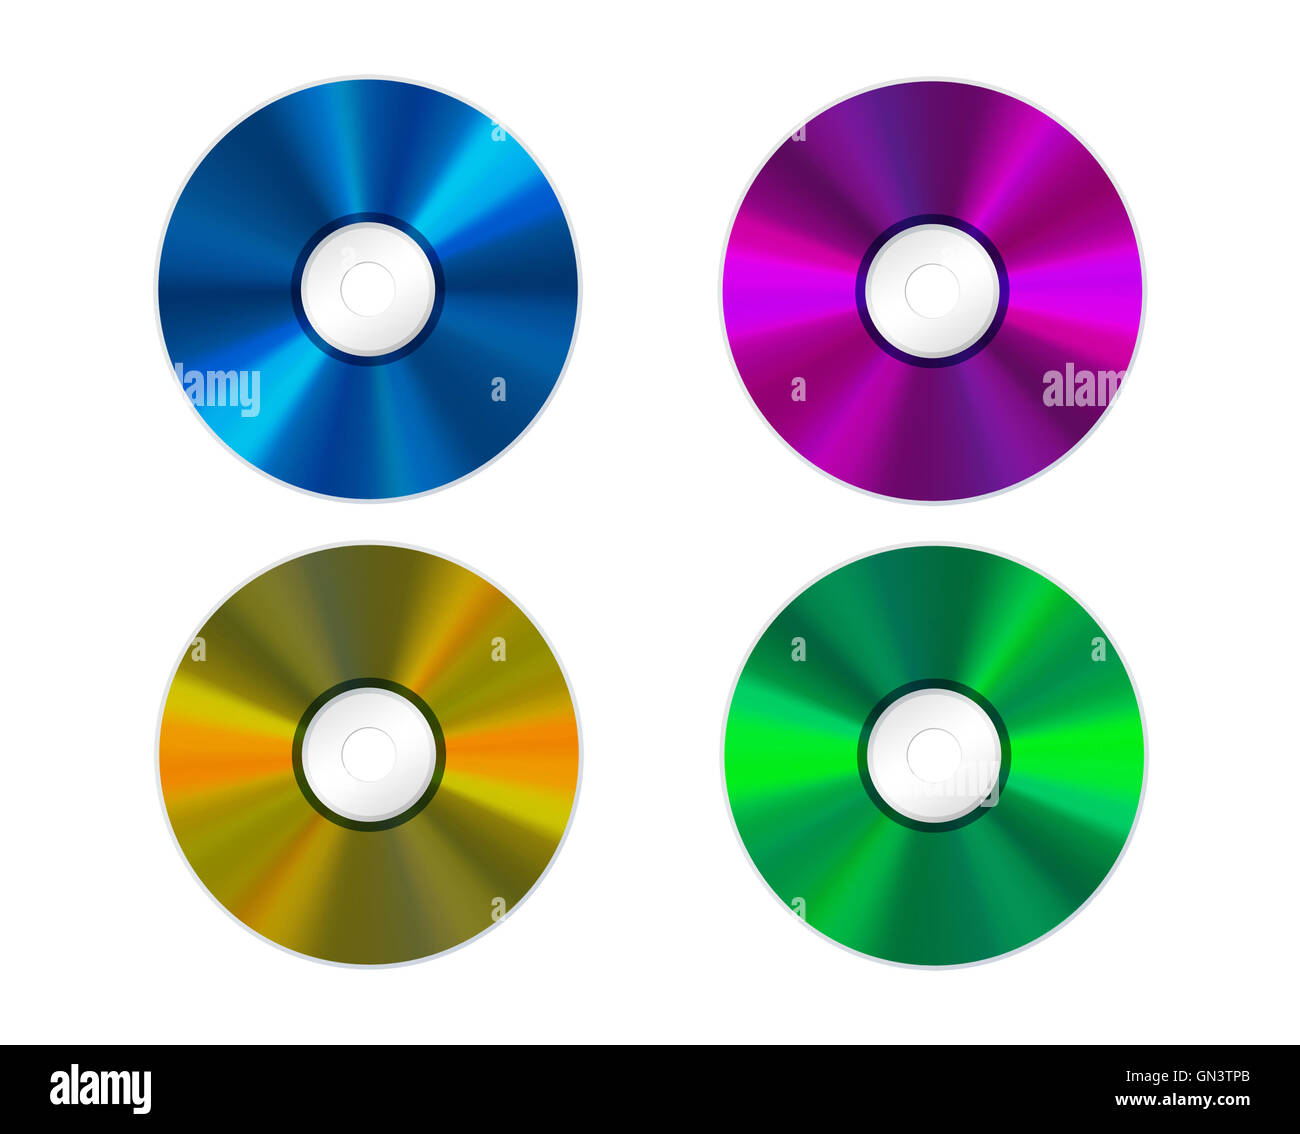 Illustration of four colored Compact Discs Stock Photo